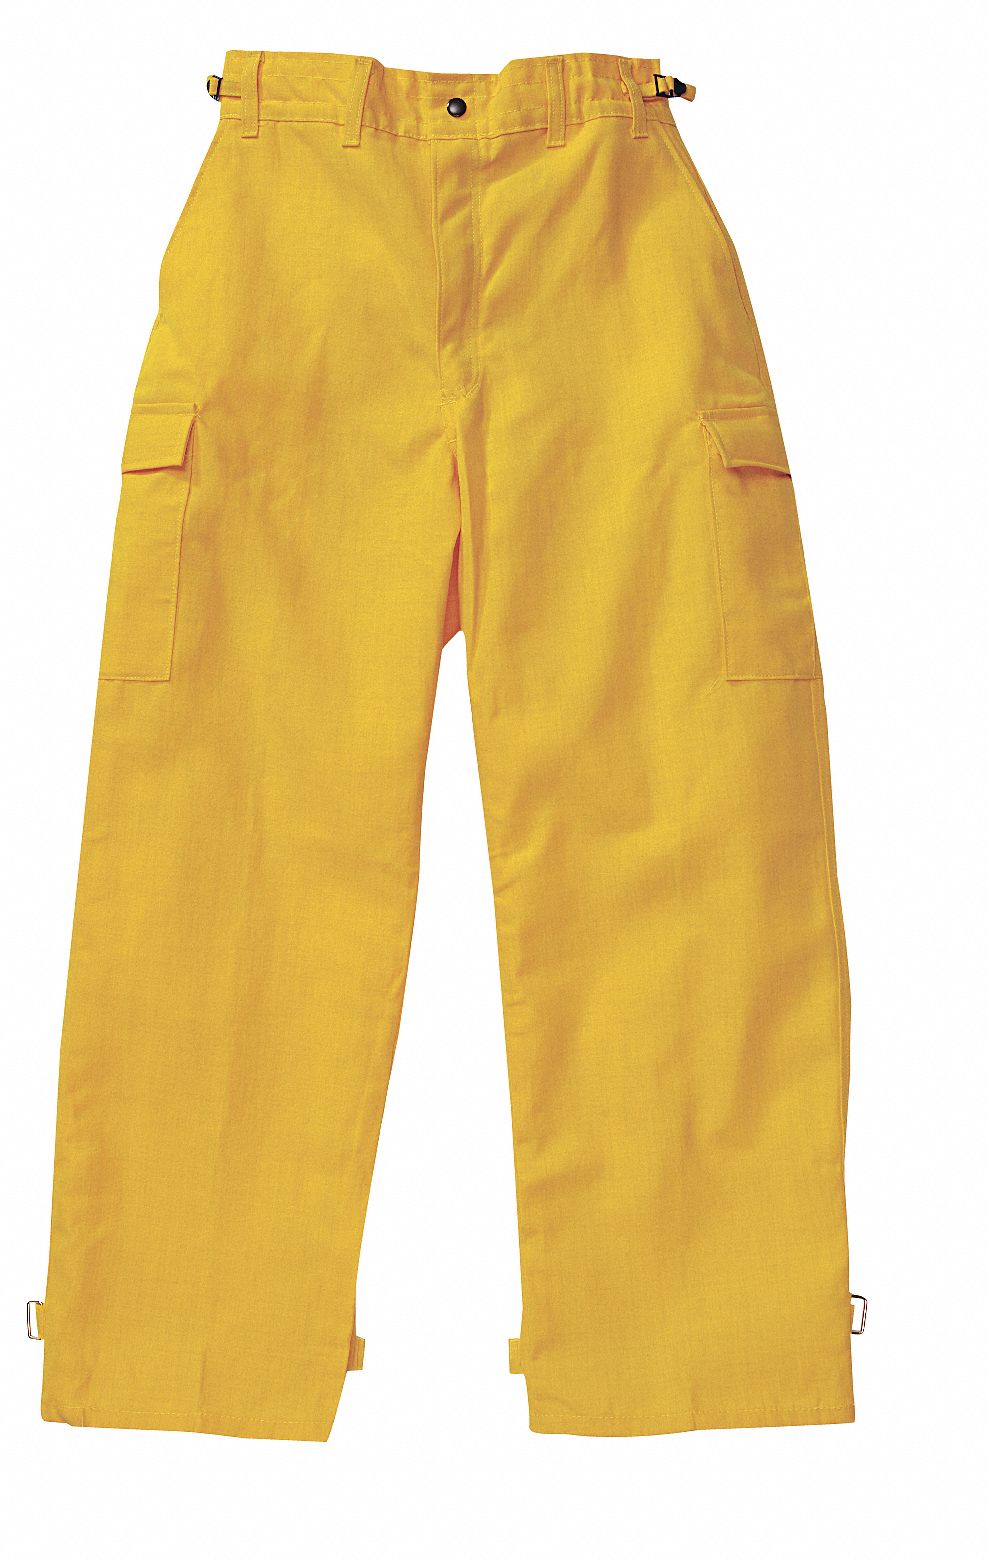 6 oz Nomex IIIA Wildland Fire Over Pants, Yellow, 34 in Inseam, Fits Waist Size 43 to 47 in